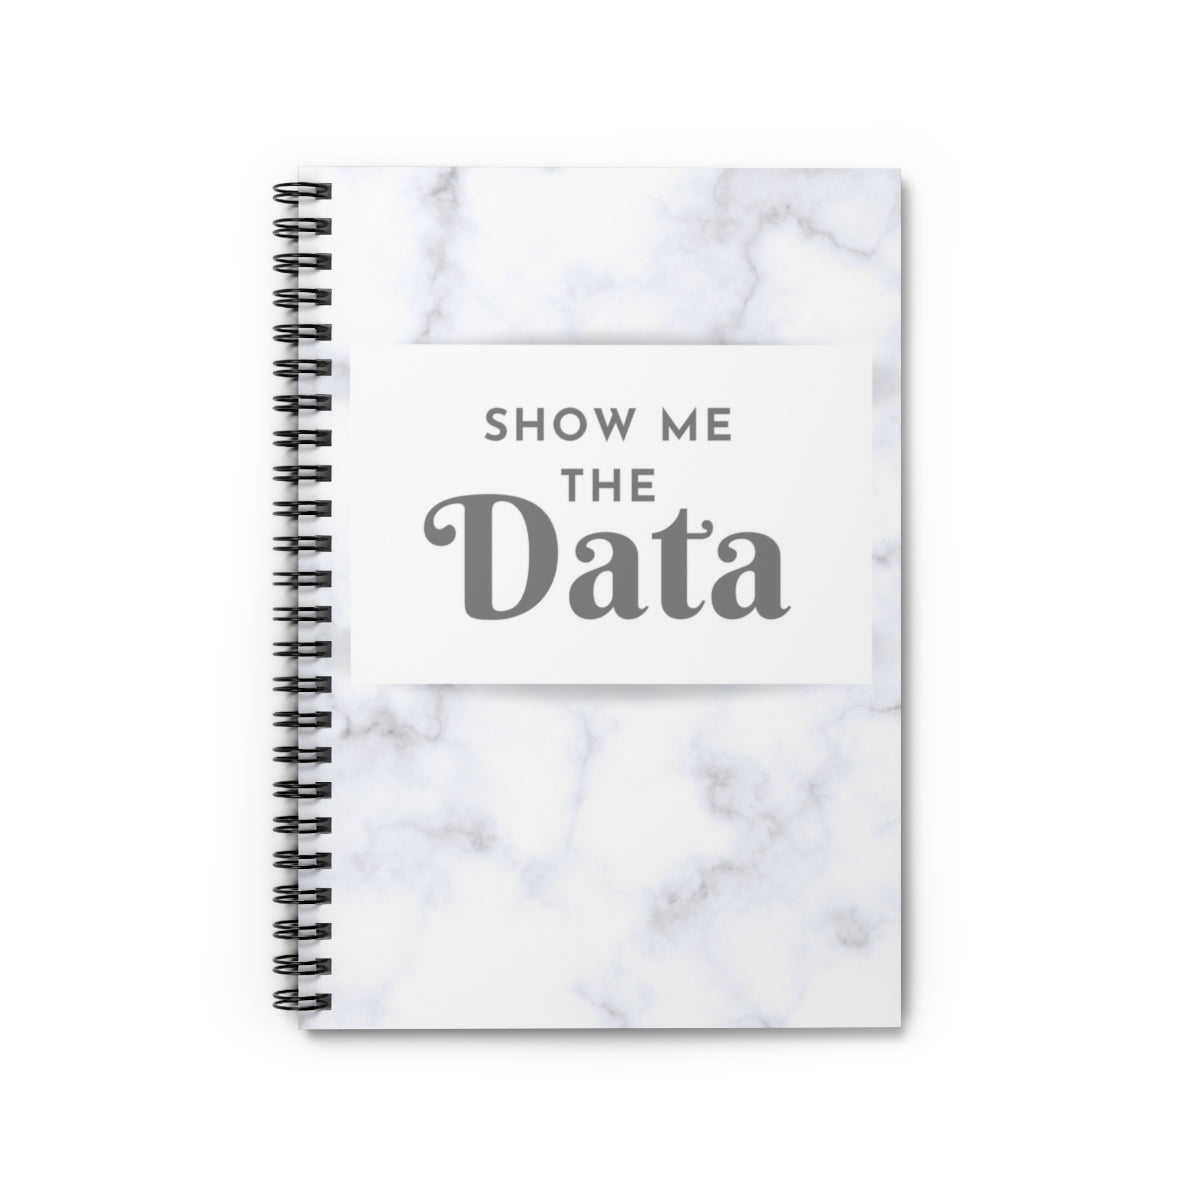 Show me the Data Spiral Notebook - Ruled Line